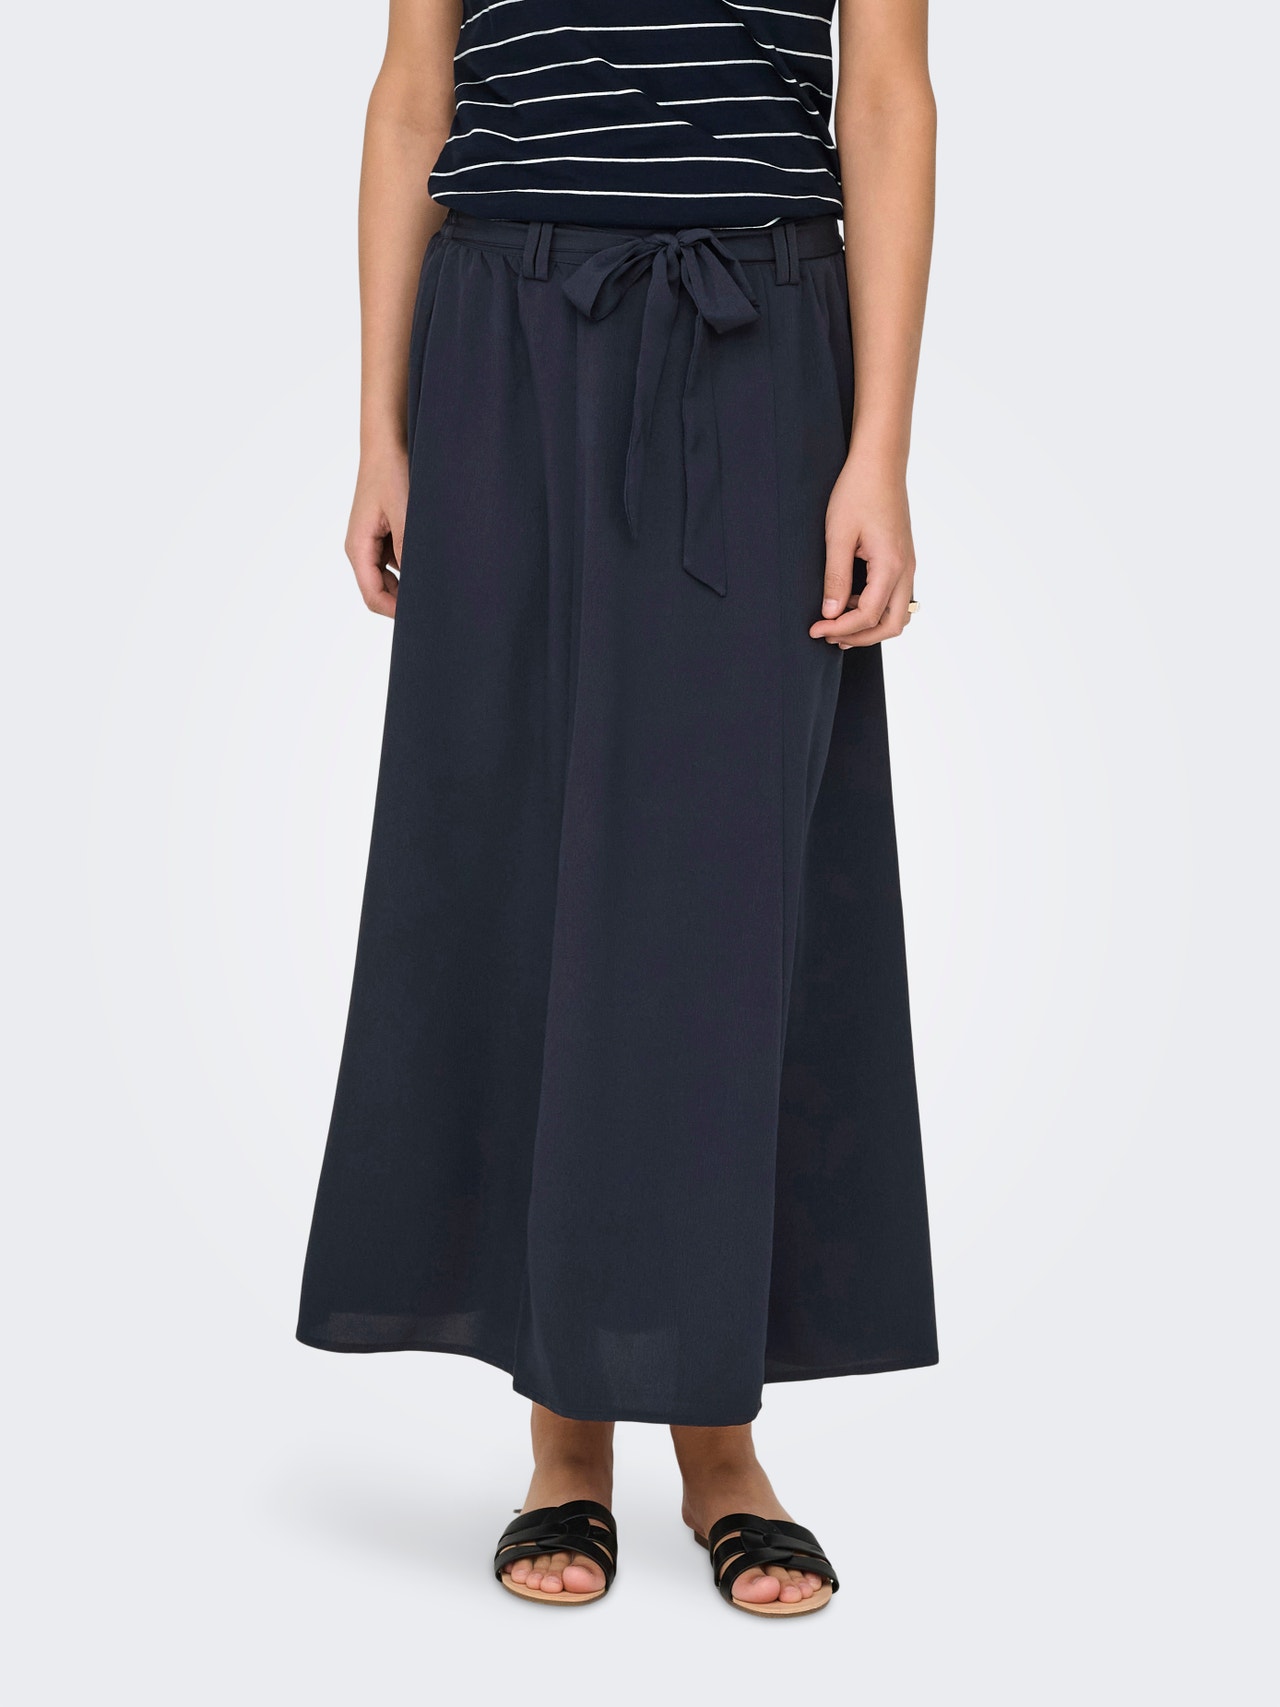 ONLY Maxi skirt with belt -Night Sky - 15335565